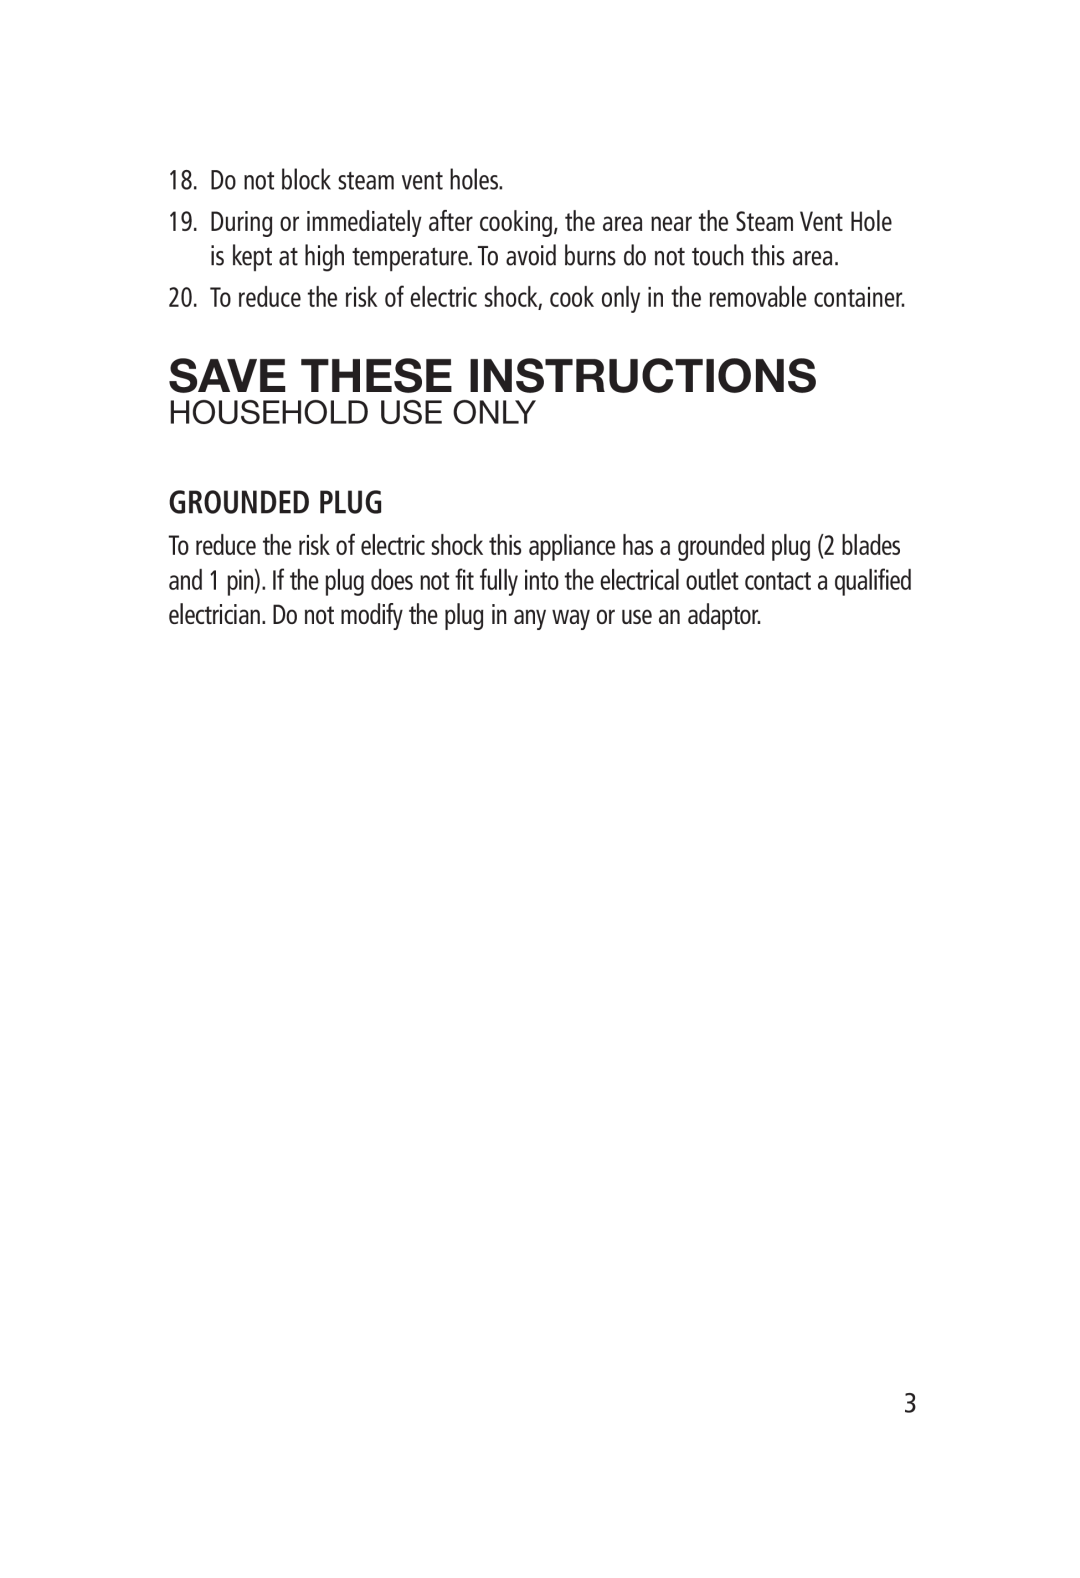 Salton RC-1203 manual Save These Instructions, Household Use Only, Grounded Plug 